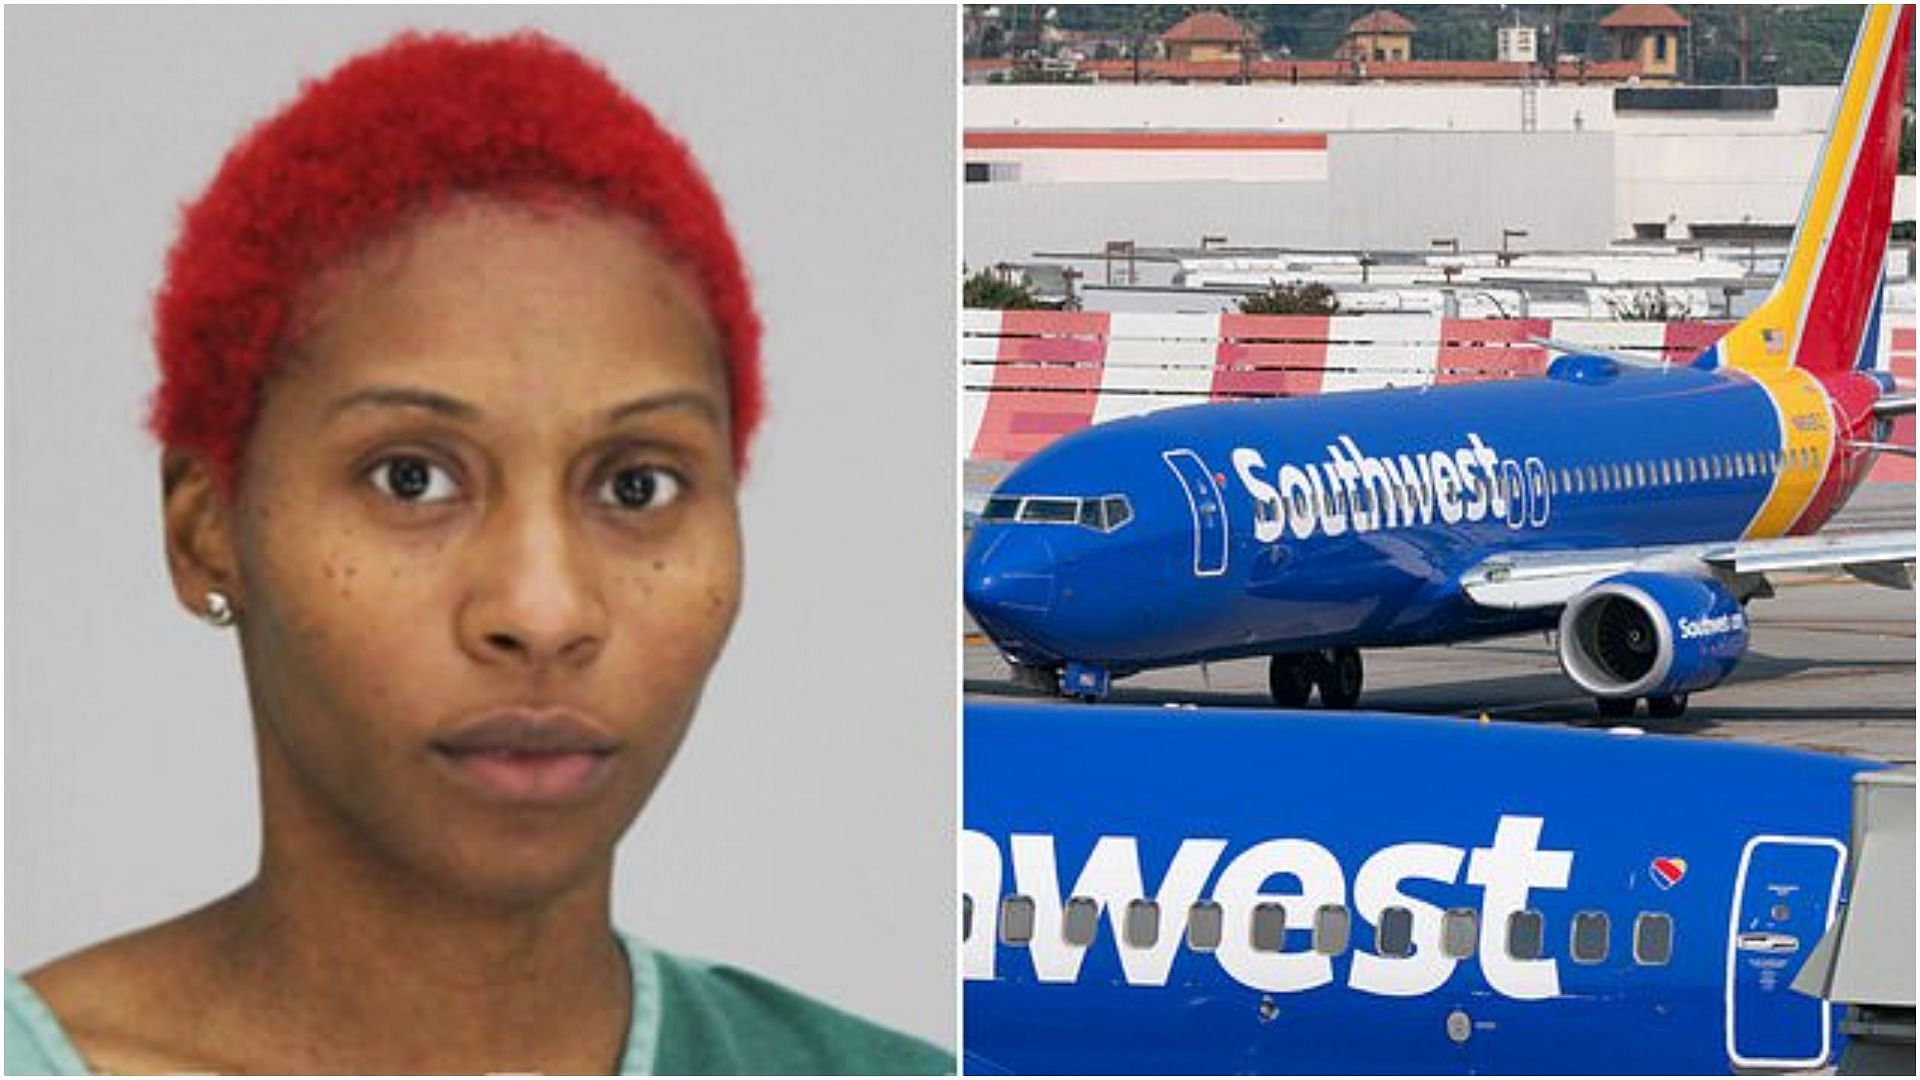 Arielle Jean Jackson was arrested for assaulting a Southwest Airlines official (Image via 1foreverseeking/Twitter)